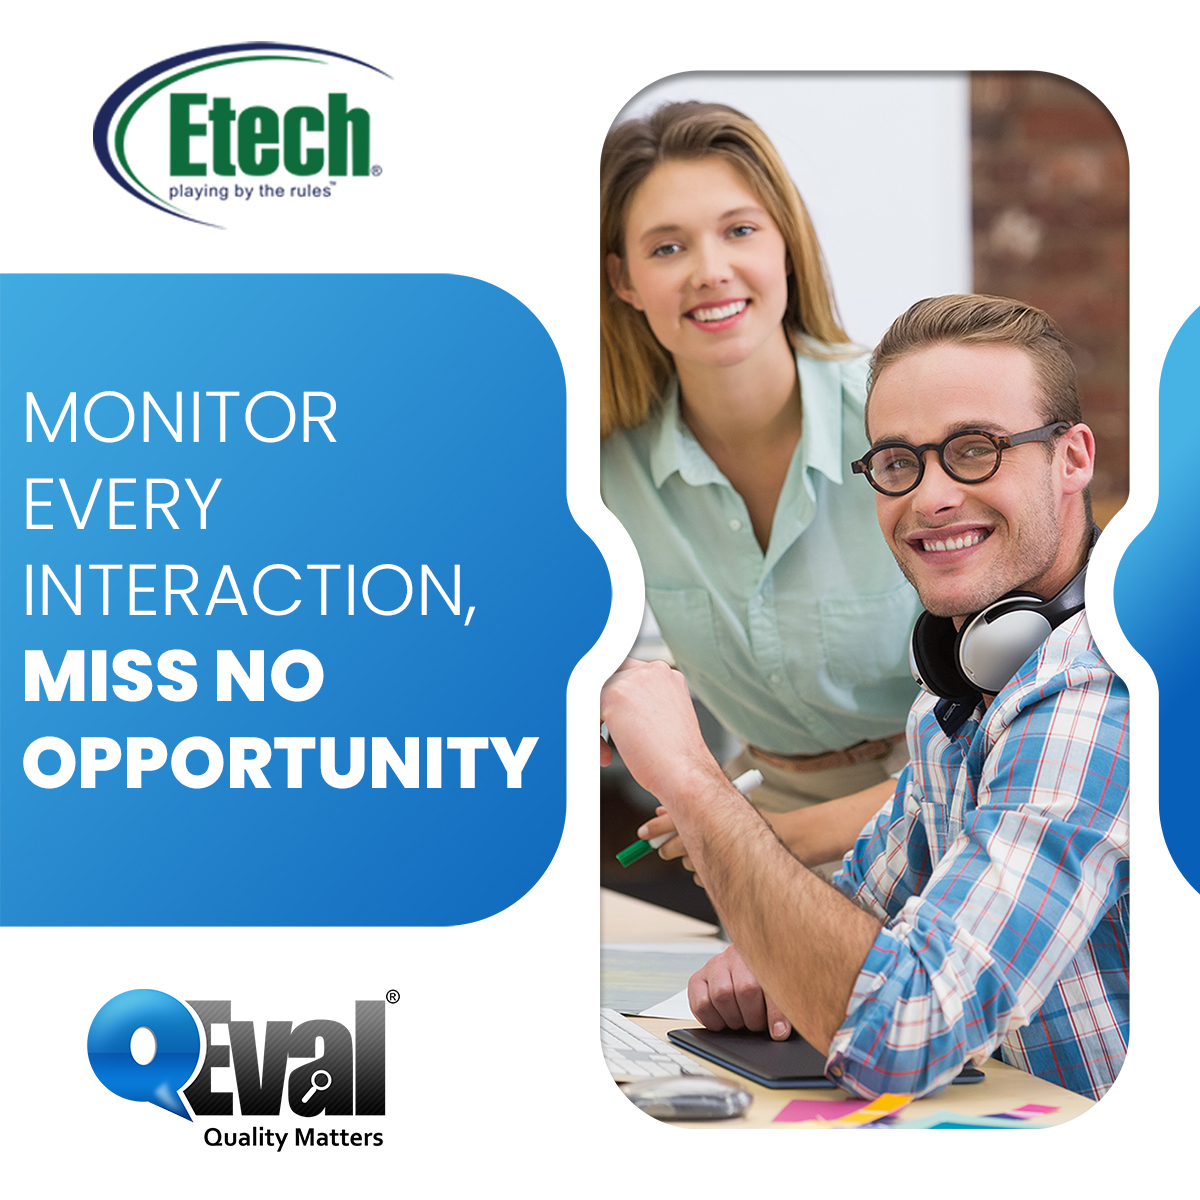 Monitor 100% of customer interactions across all engagement channels with Etech’s QEval. Unlock new frontiers of #CX and determine actionable insights to elevate #CustomerExperience.

Request a Free Consultation: bit.ly/3Y62Cxs

#QualityAssurance #SpeechAnalytics